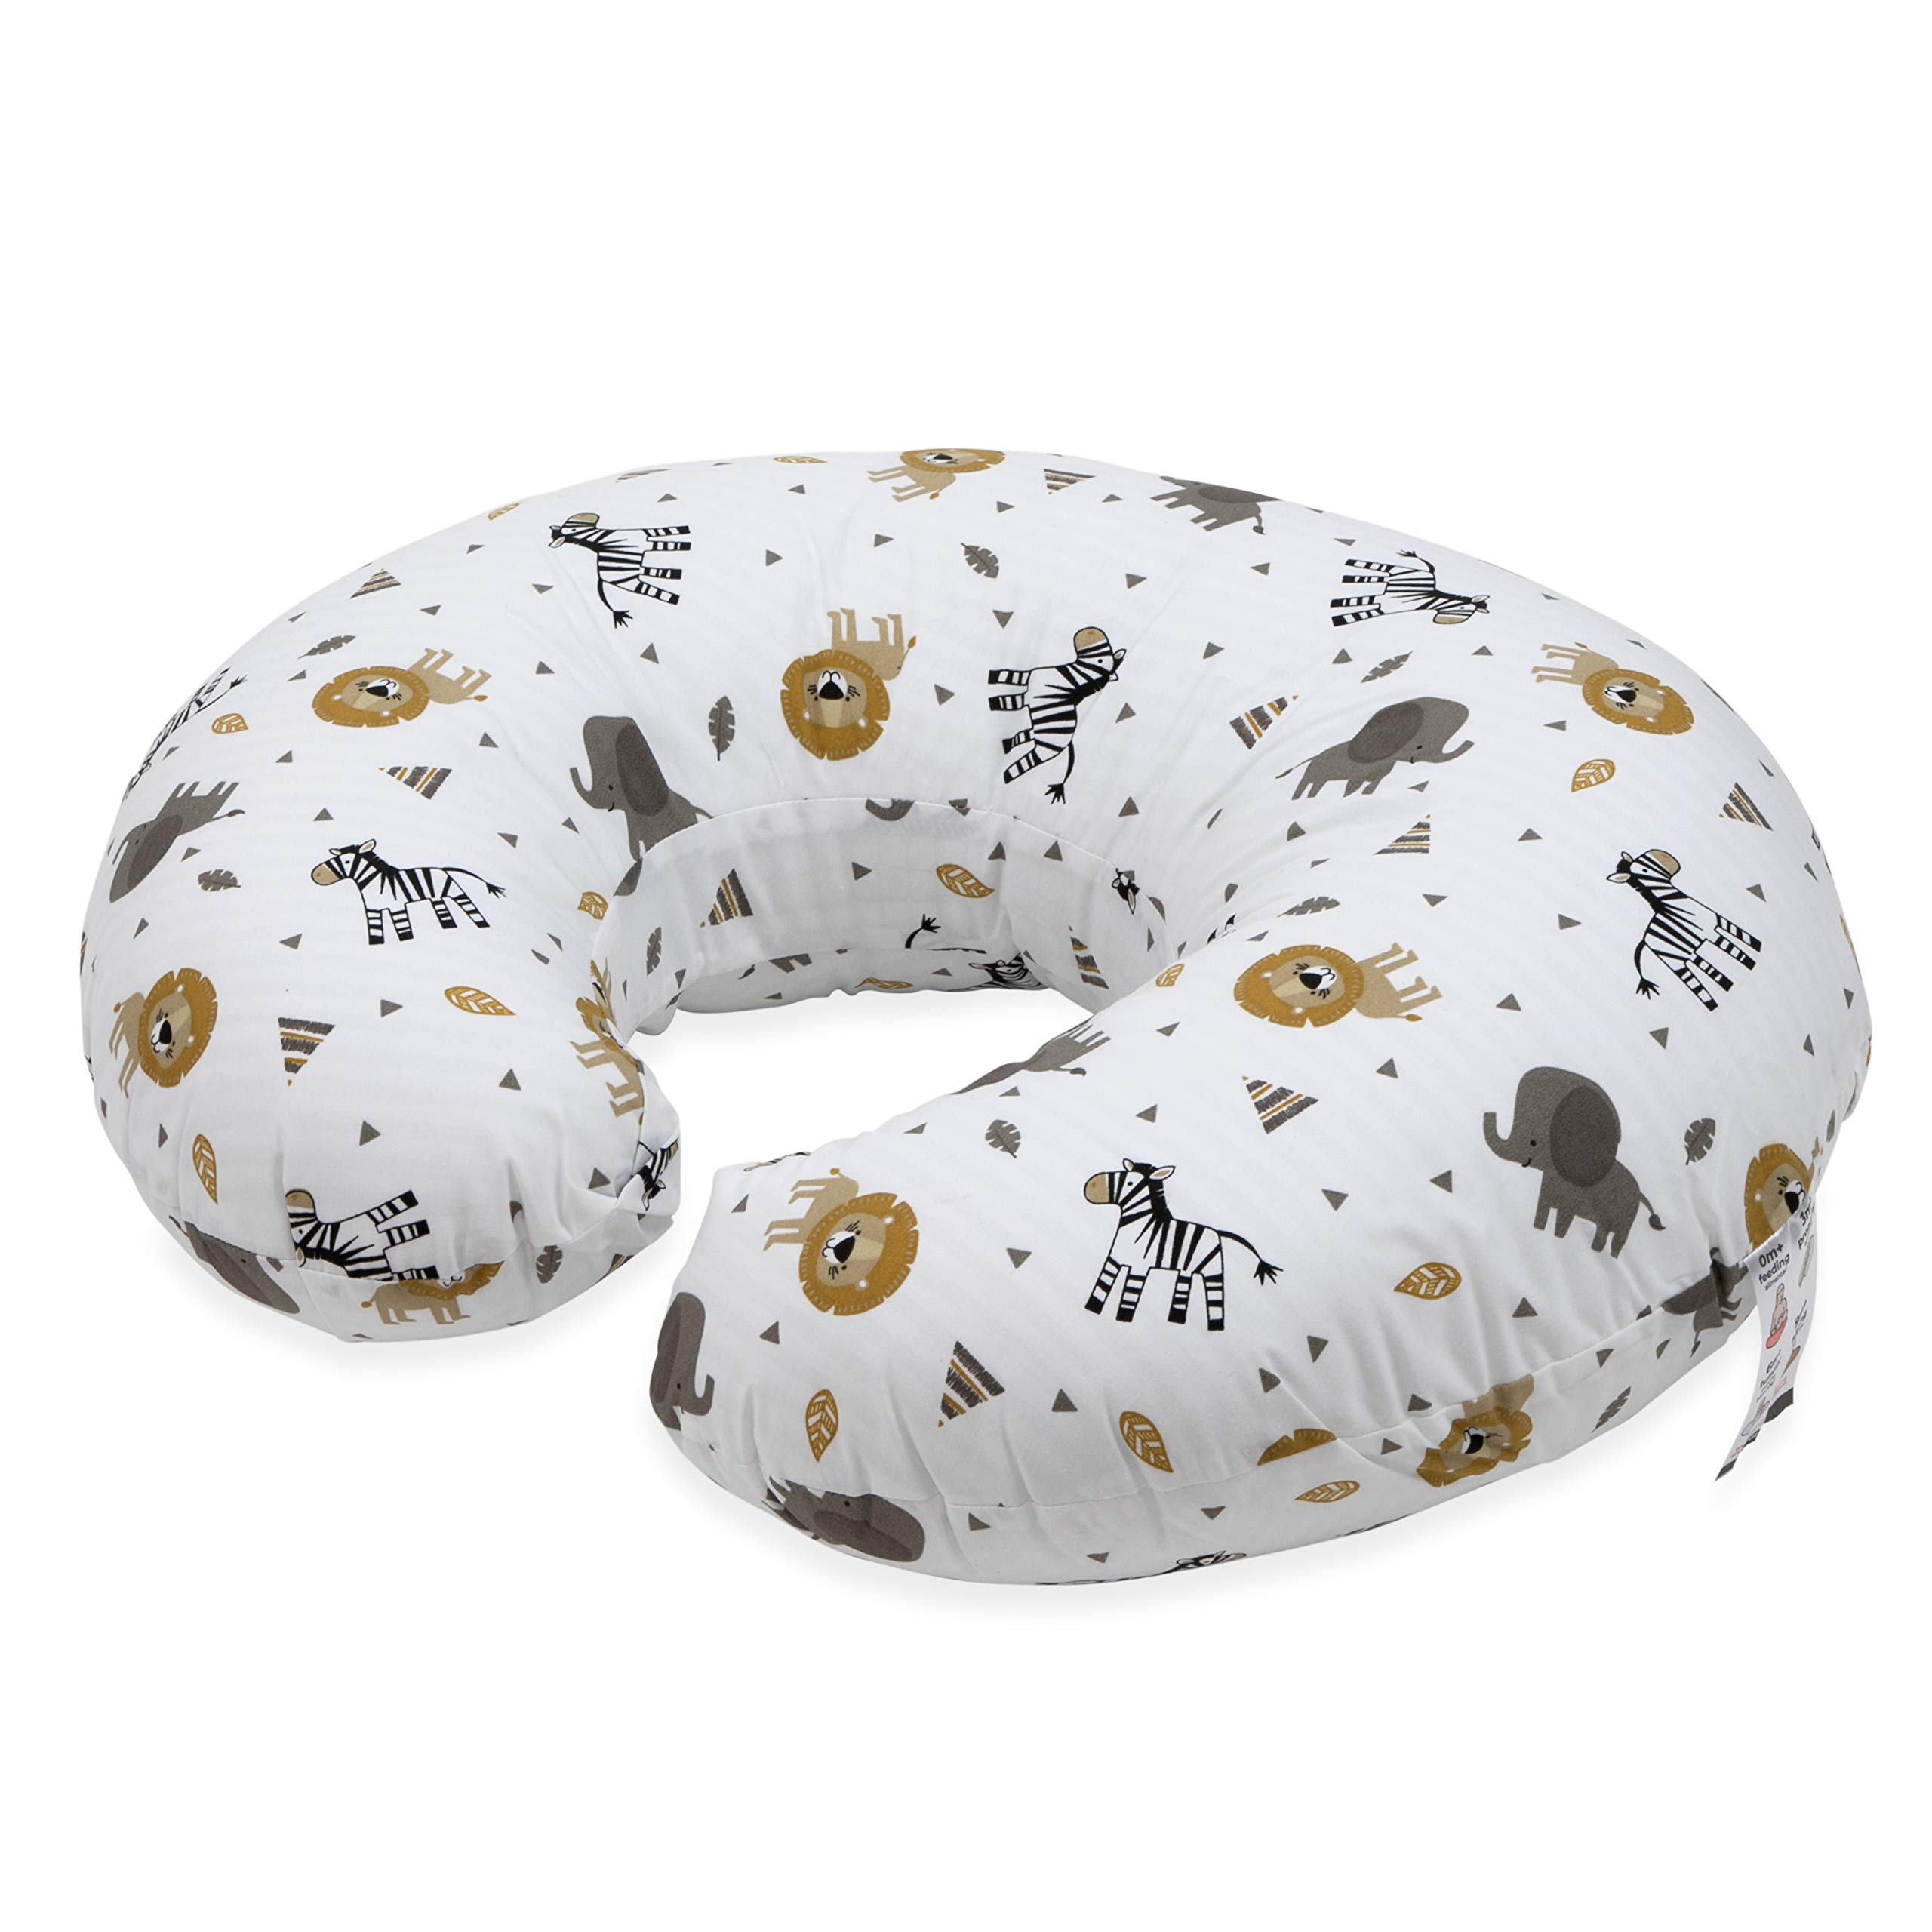 Nuby Support Pod Infant Breastfeeding Support Pillow by Dr. Talbot's, Zoo Animal Print